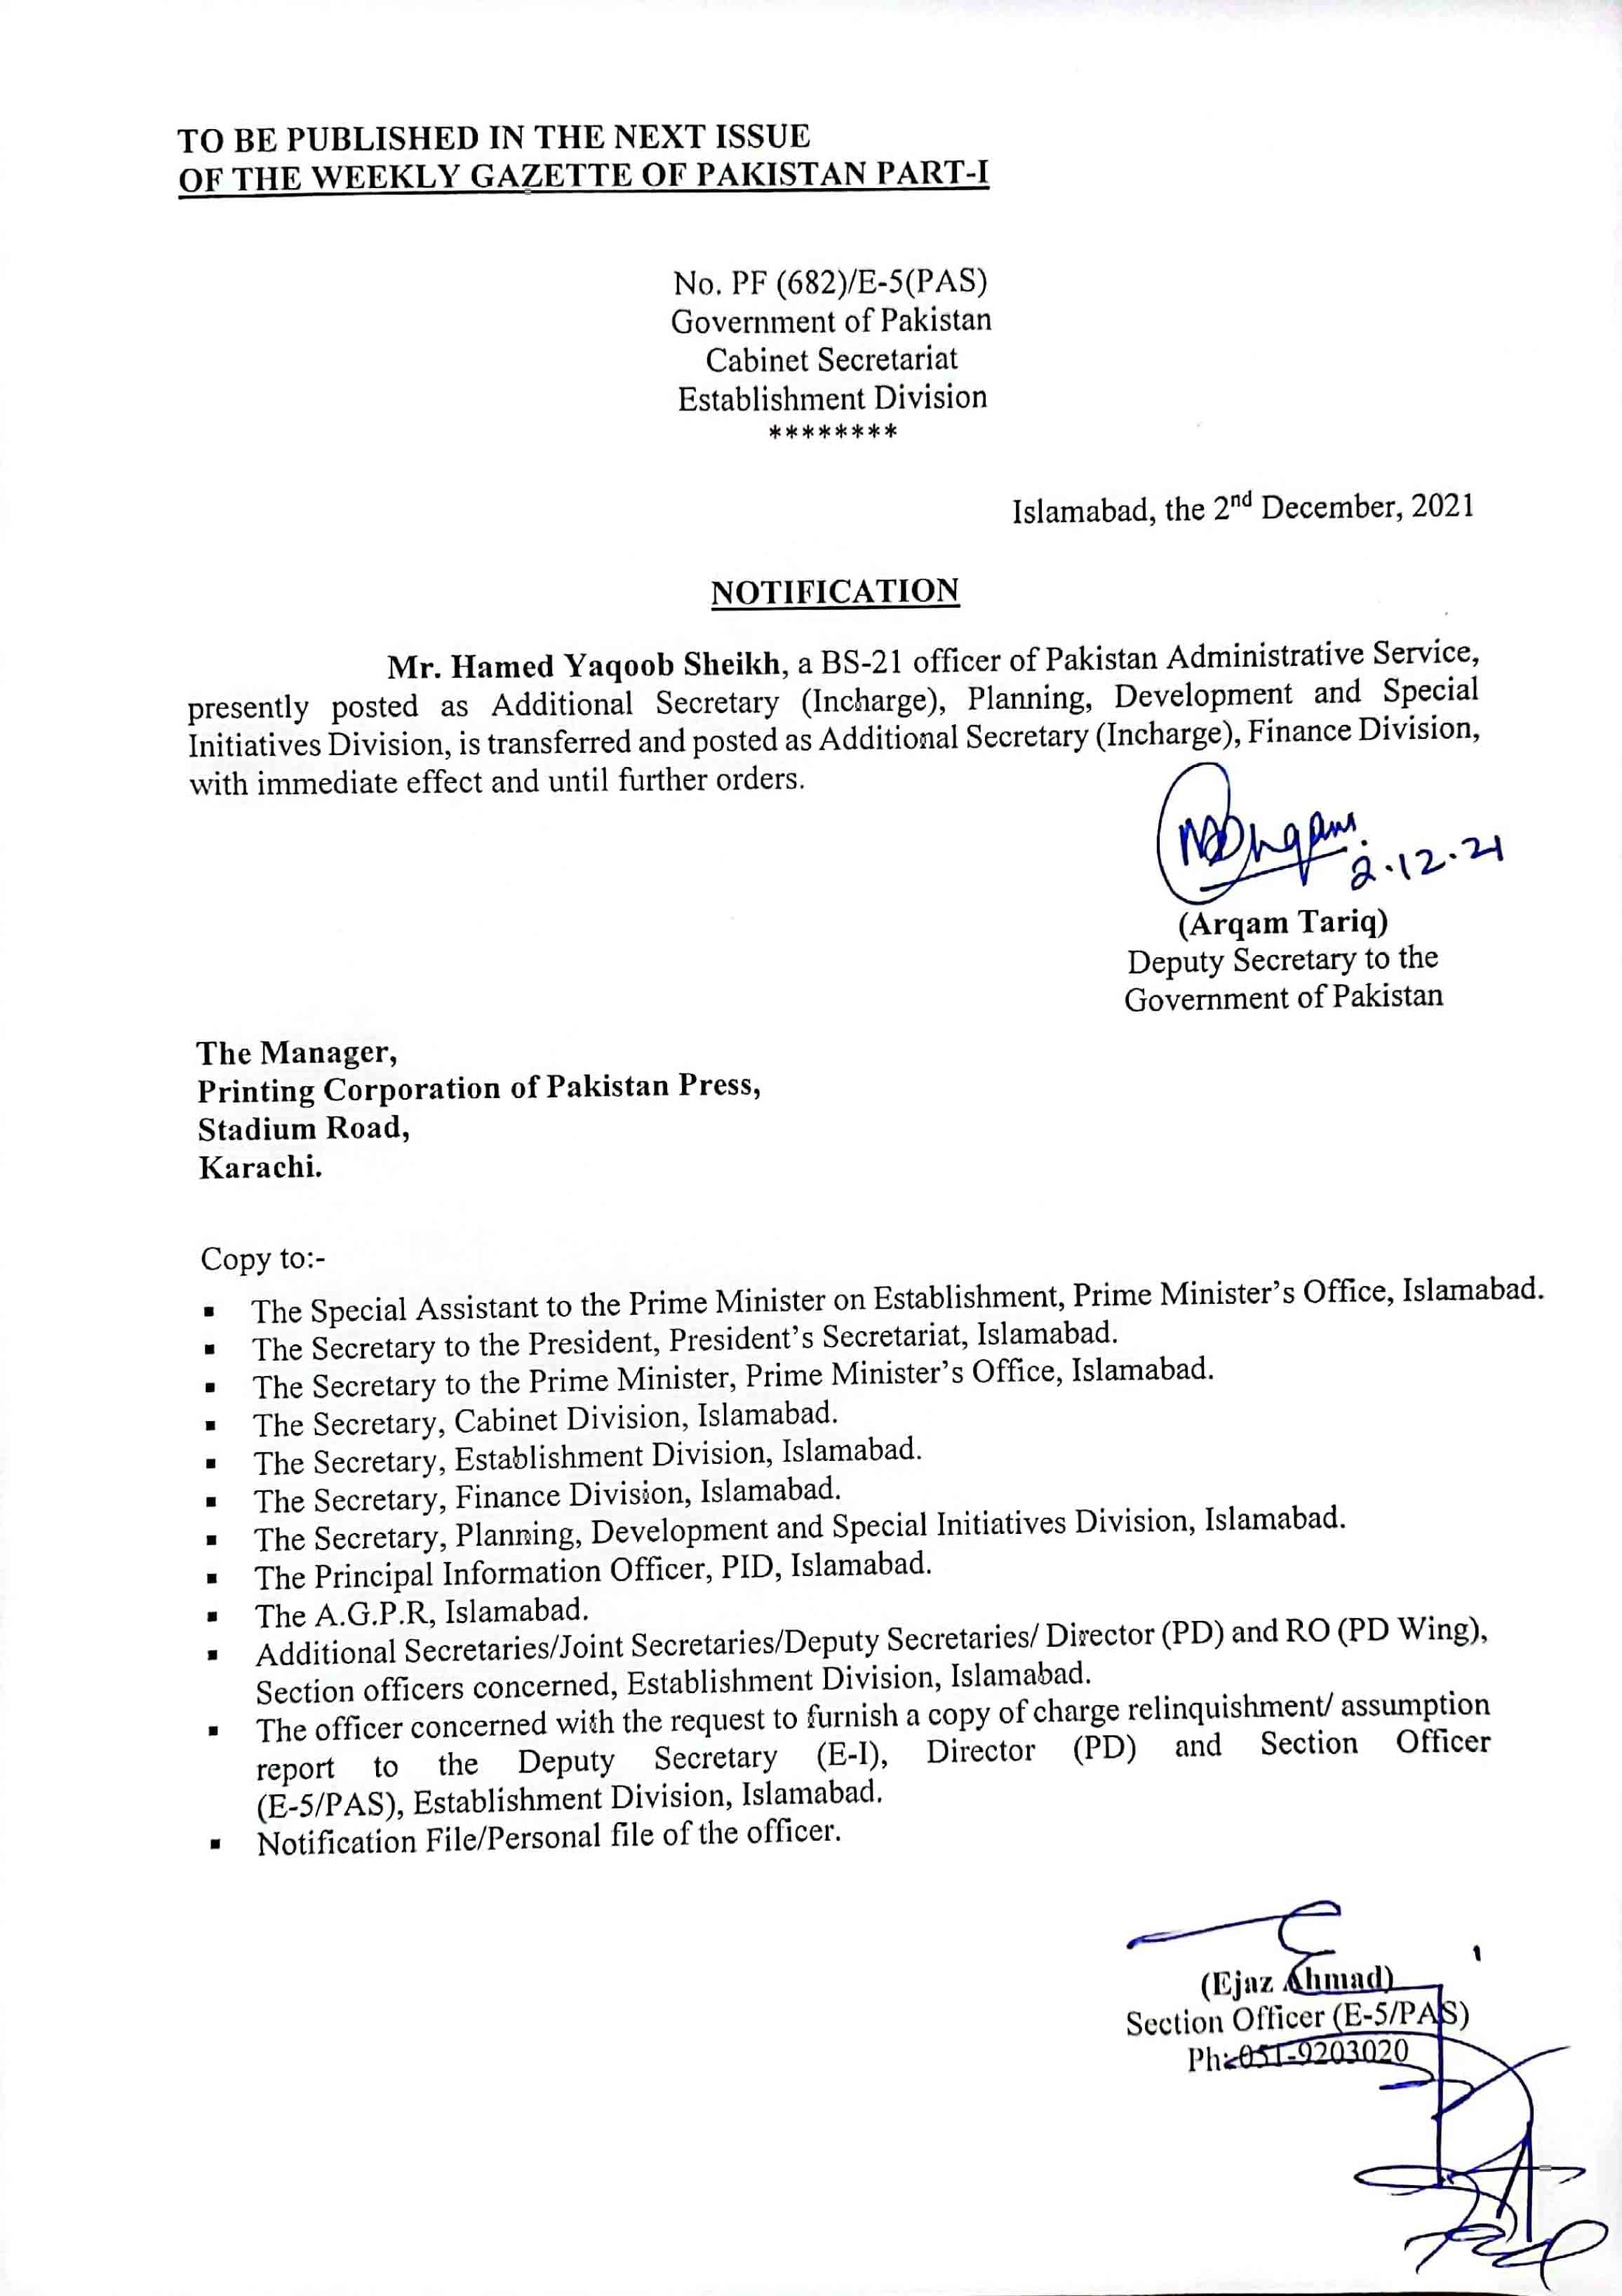 The notification issued by the Establishment Division.